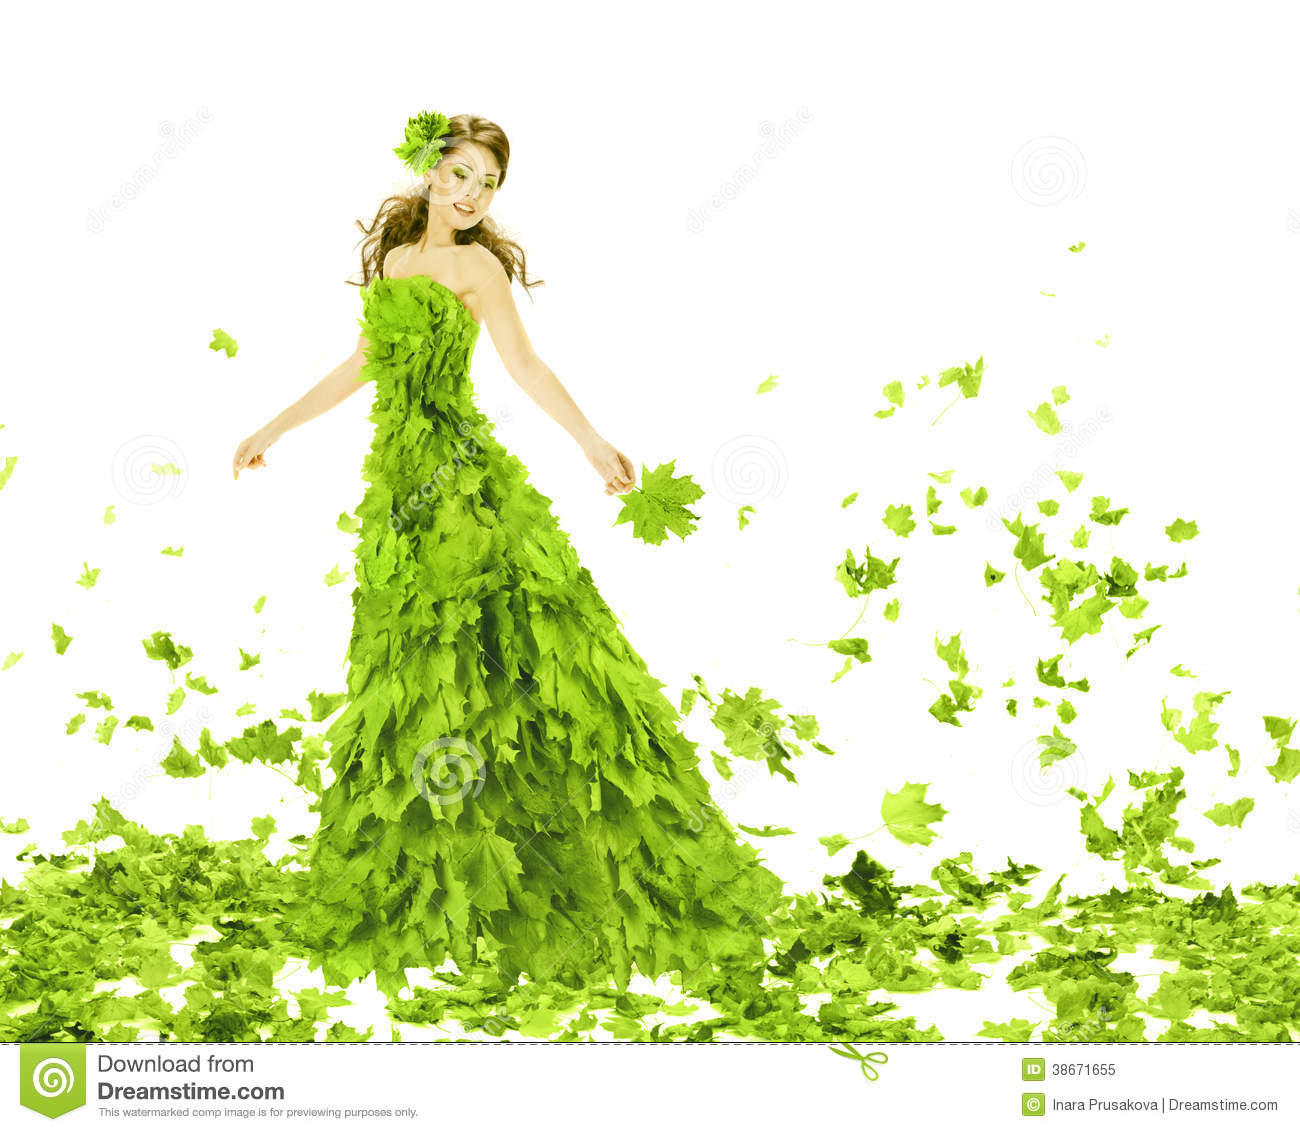 Fantasy Beauty Woman In Leaves Dress Royalty Free Stock Photo   Image